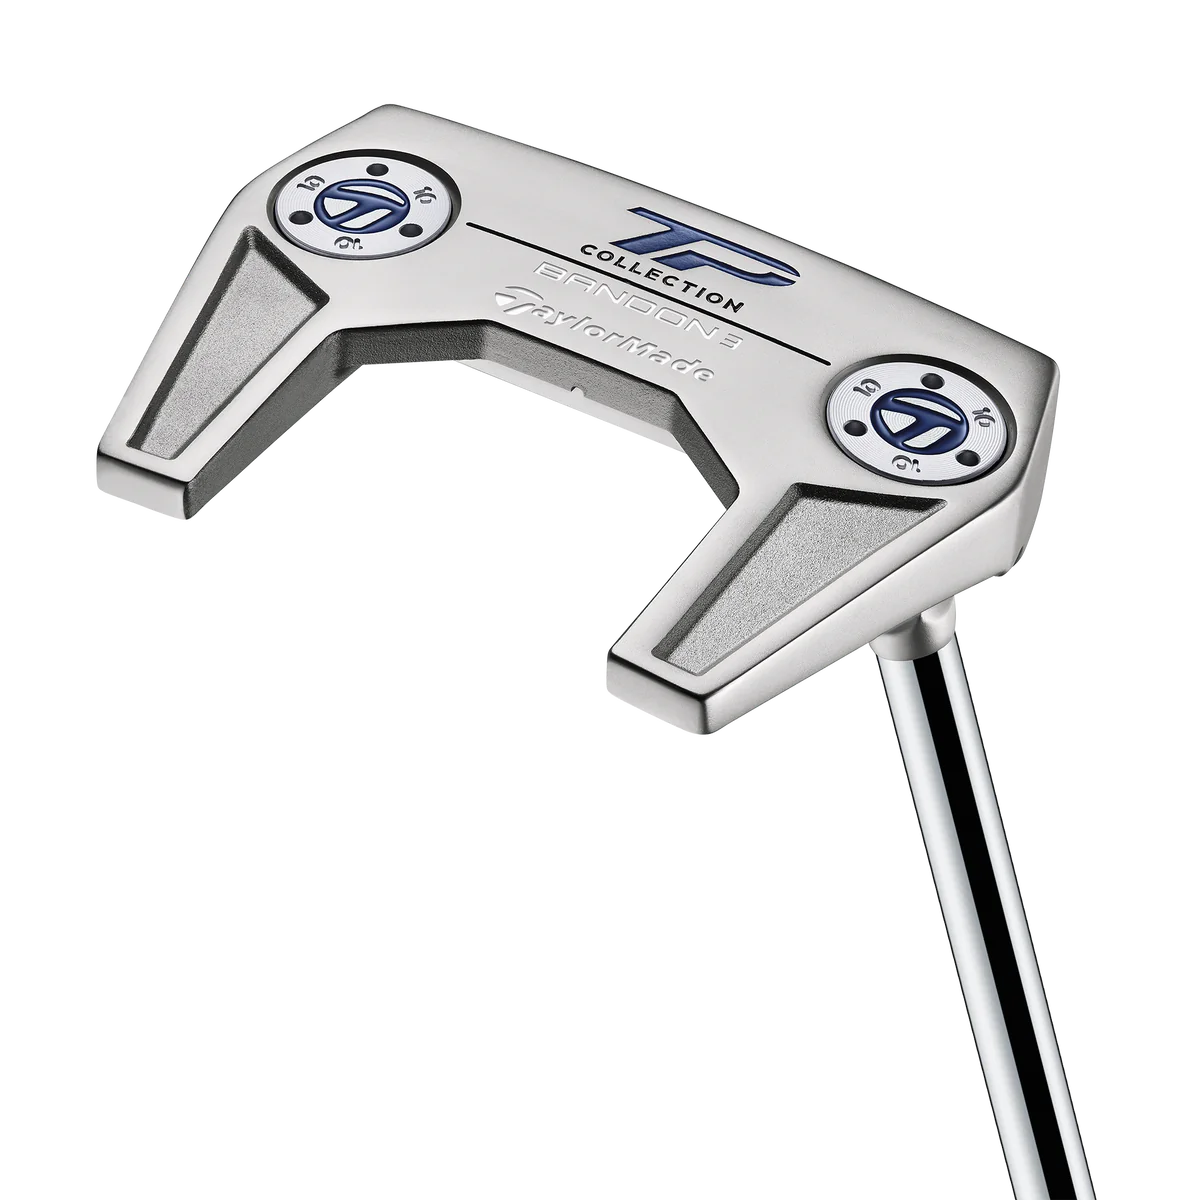 pros and cons of taylor made tp hydro blast bandon 3 putter